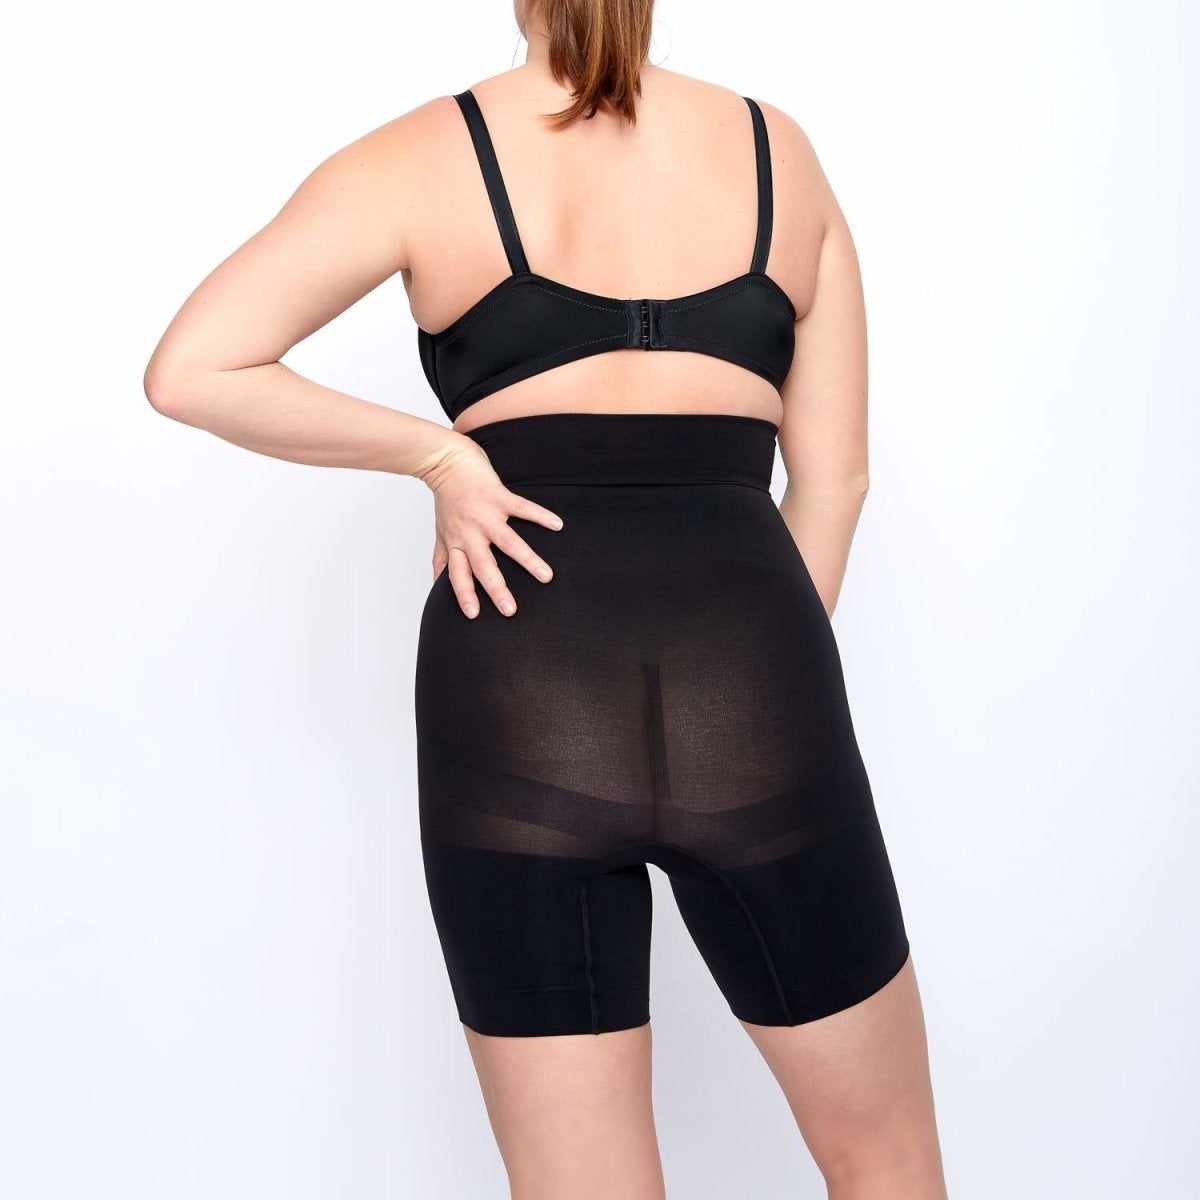 News - High-Waisted Shape Shorts: A Best-Selling Product with Over